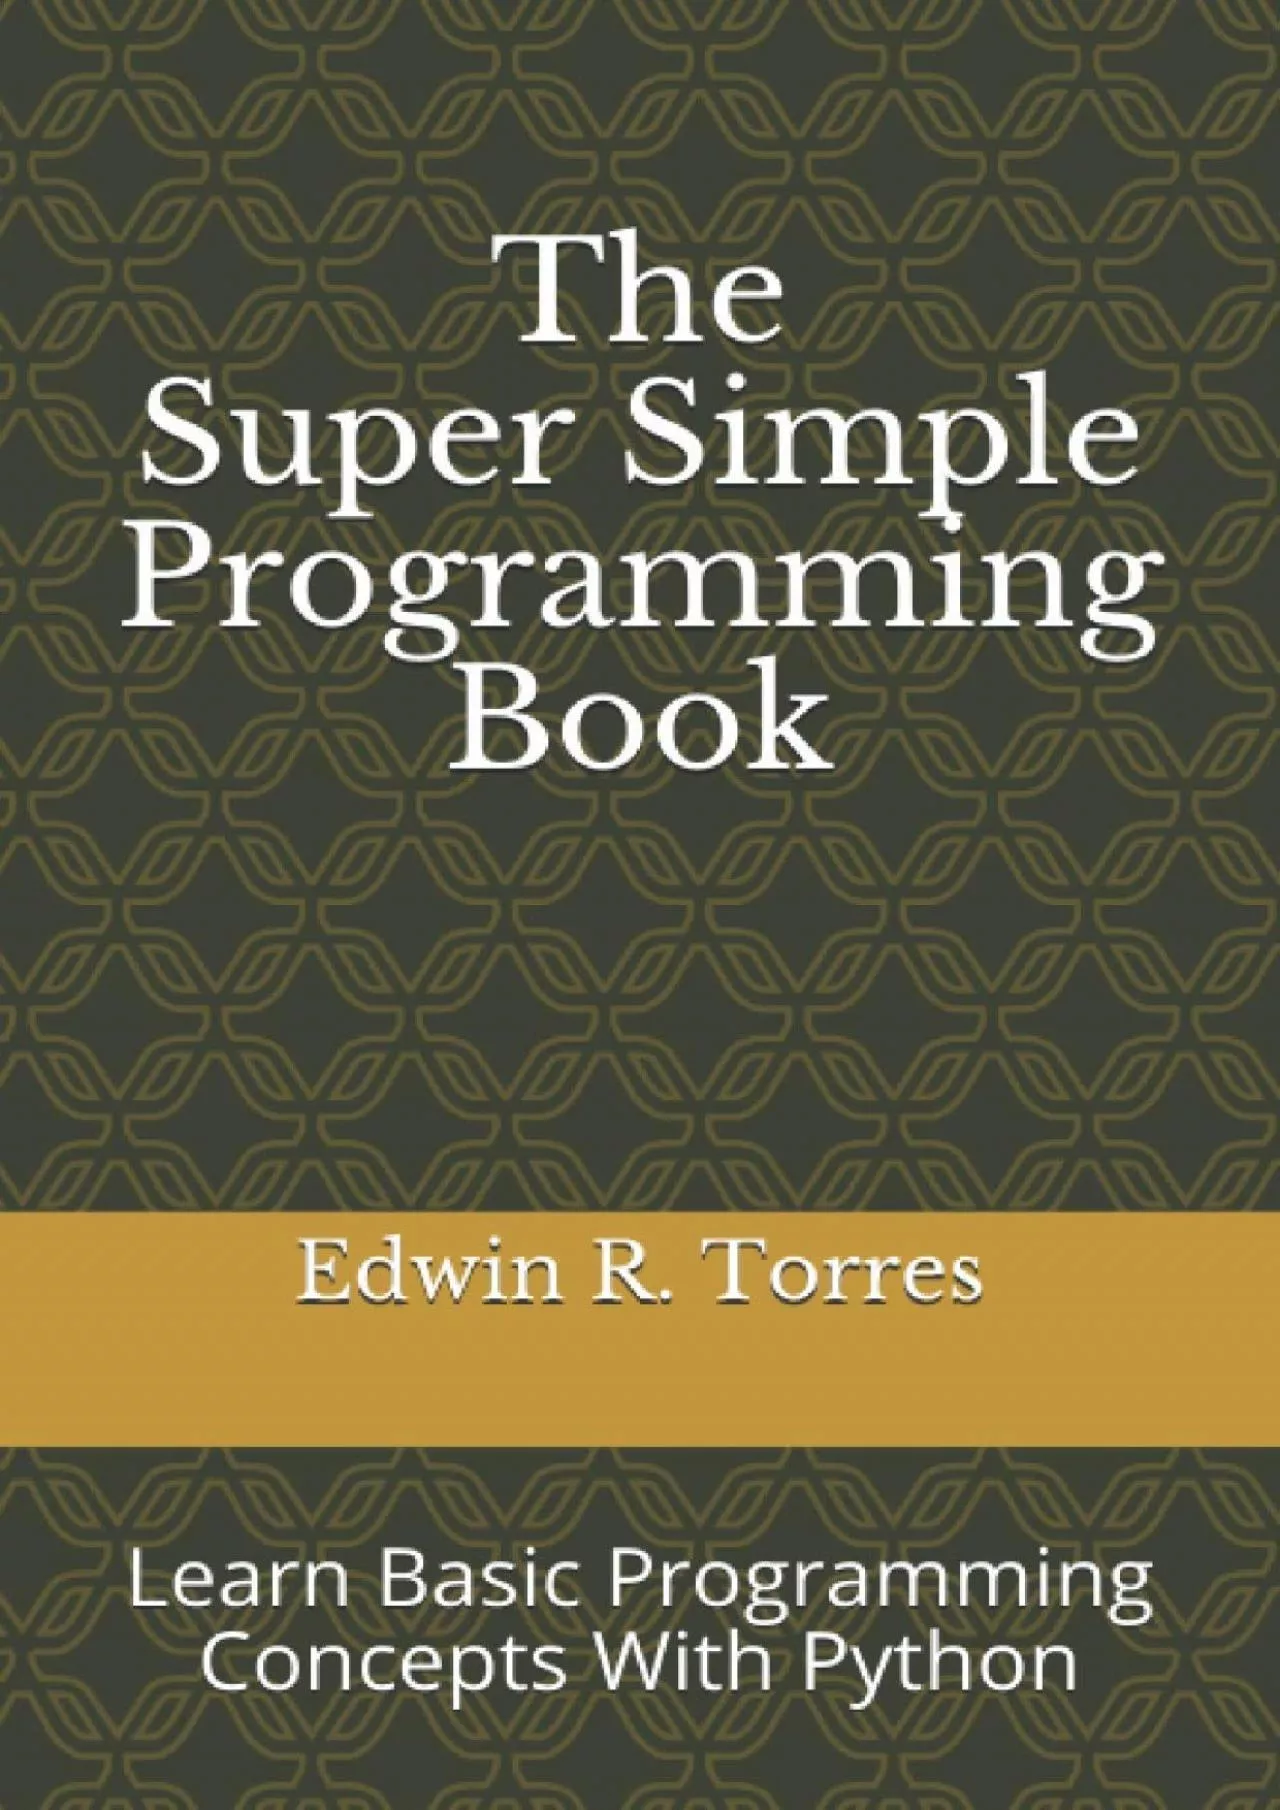 [DOWLOAD]-The Super Simple Programming Book Learn Basic Programming Concepts With Python